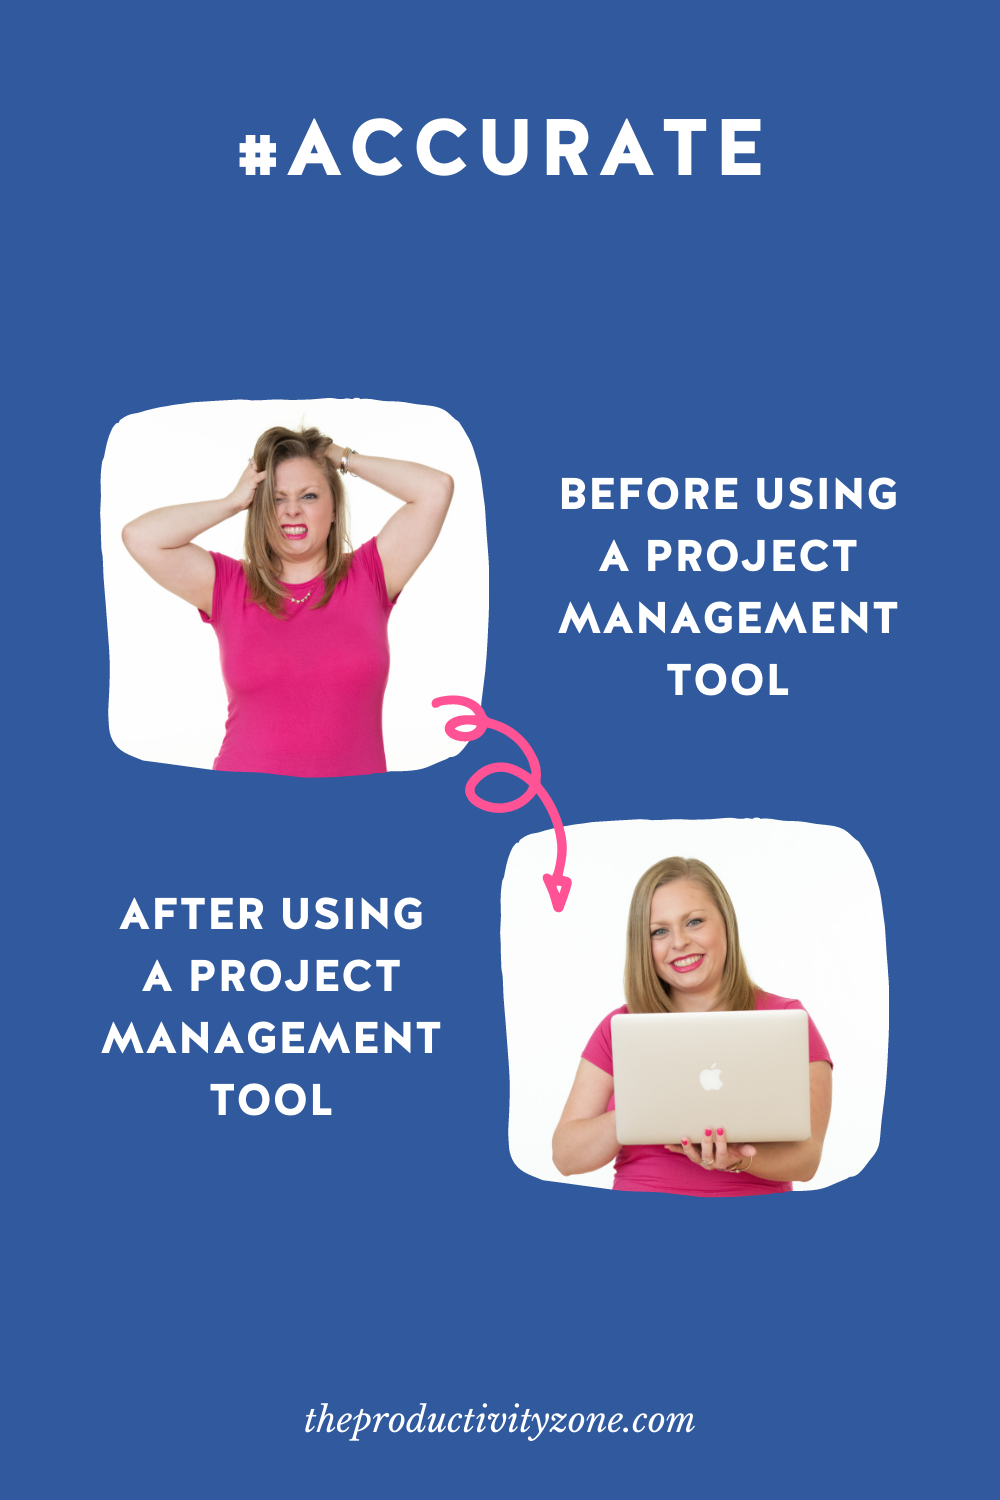 Navy background with a photo depicting what business is like BEFORE using a project management tool (stressed, hair a mess) and another picture depicting life AFTER using a project management tool (happy business owner)